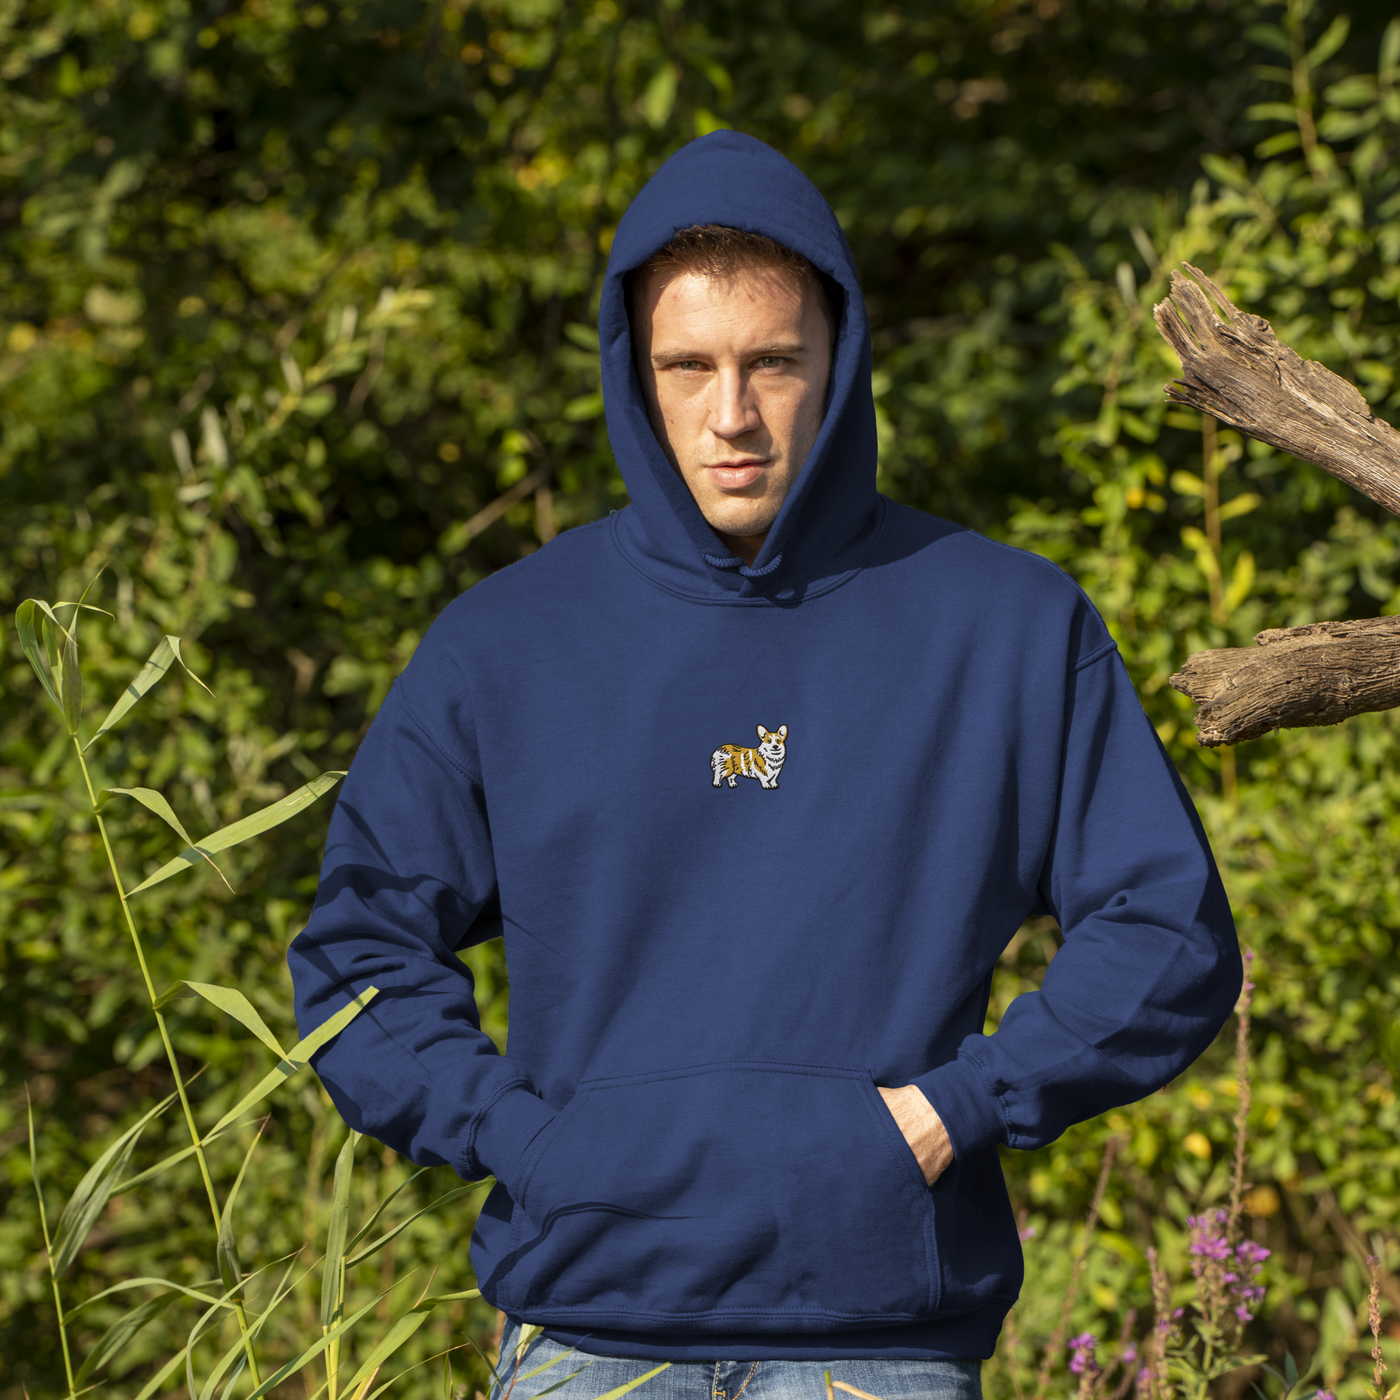 Bobby's Planet Men's Embroidered Corgi Hoodie from Paws Dog Cat Animals Collection in Navy Color#color_navy